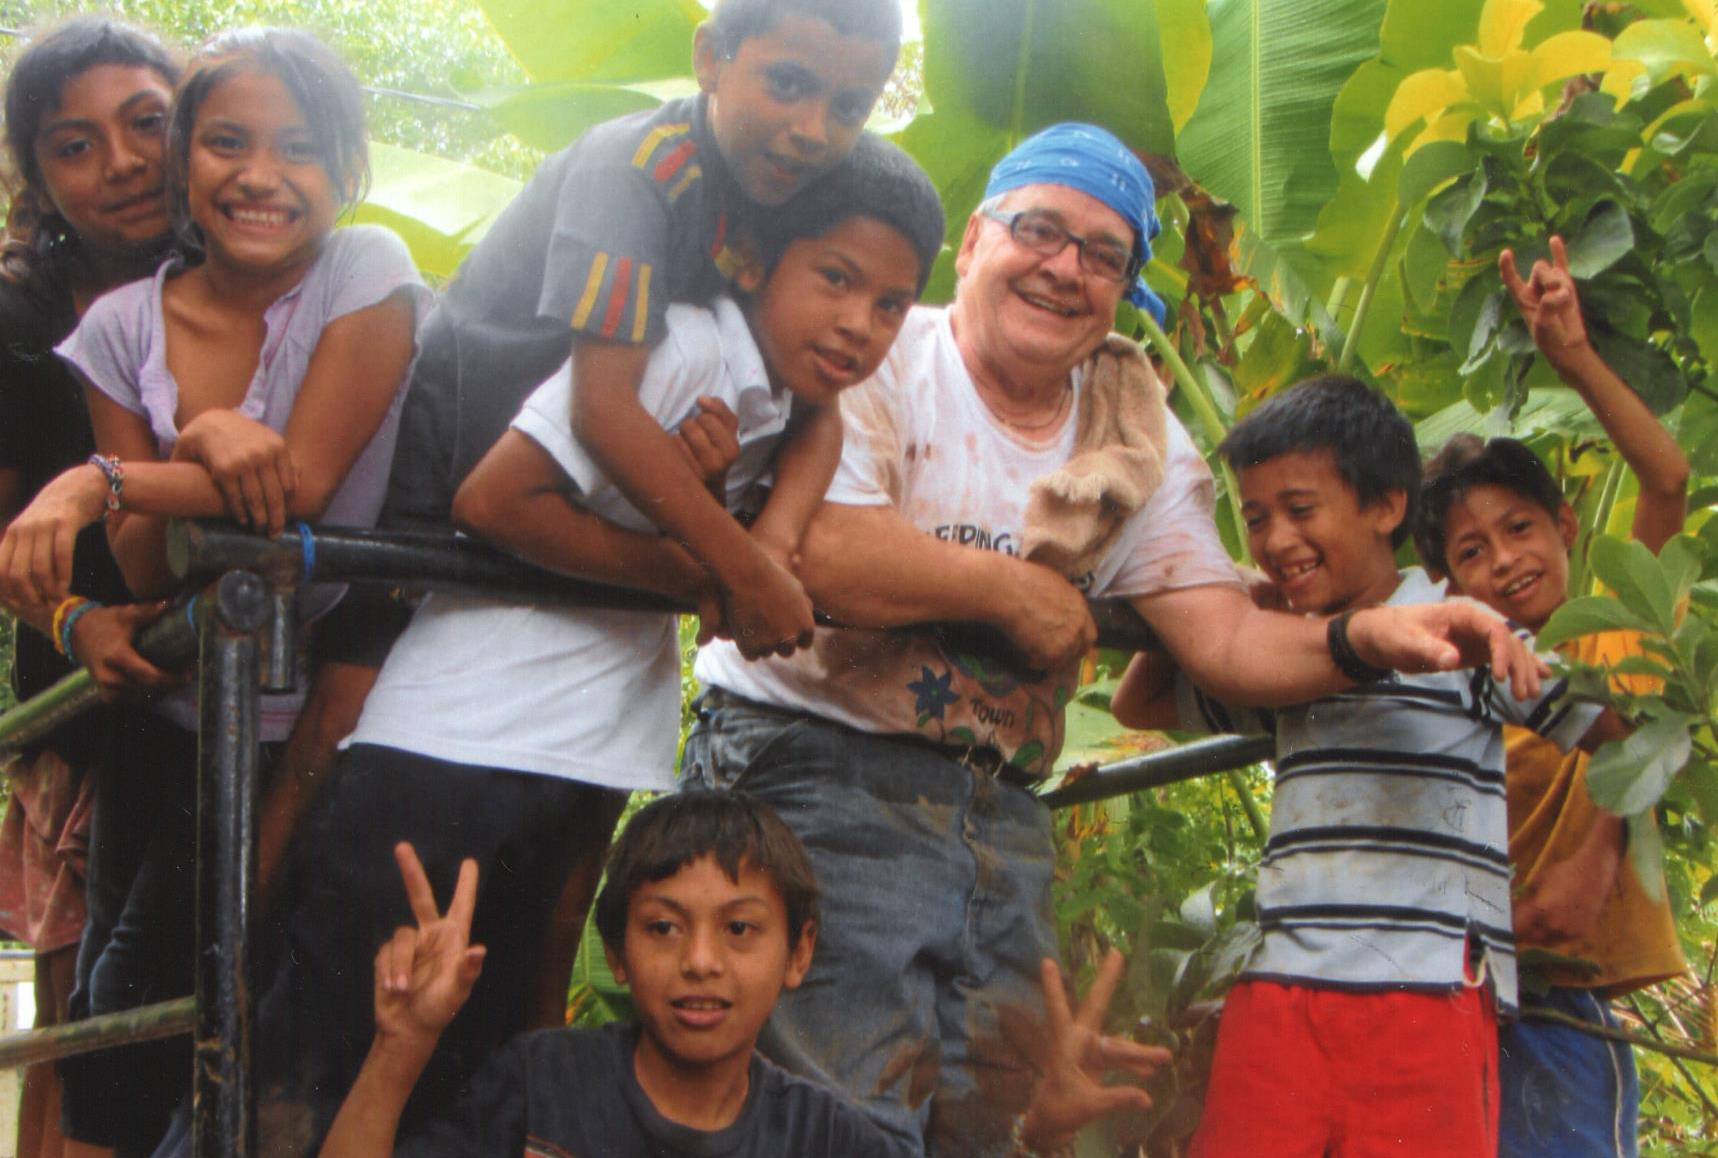 Tony with kids while building a house in the community of La Ceibita, Masaya in Nicaragua